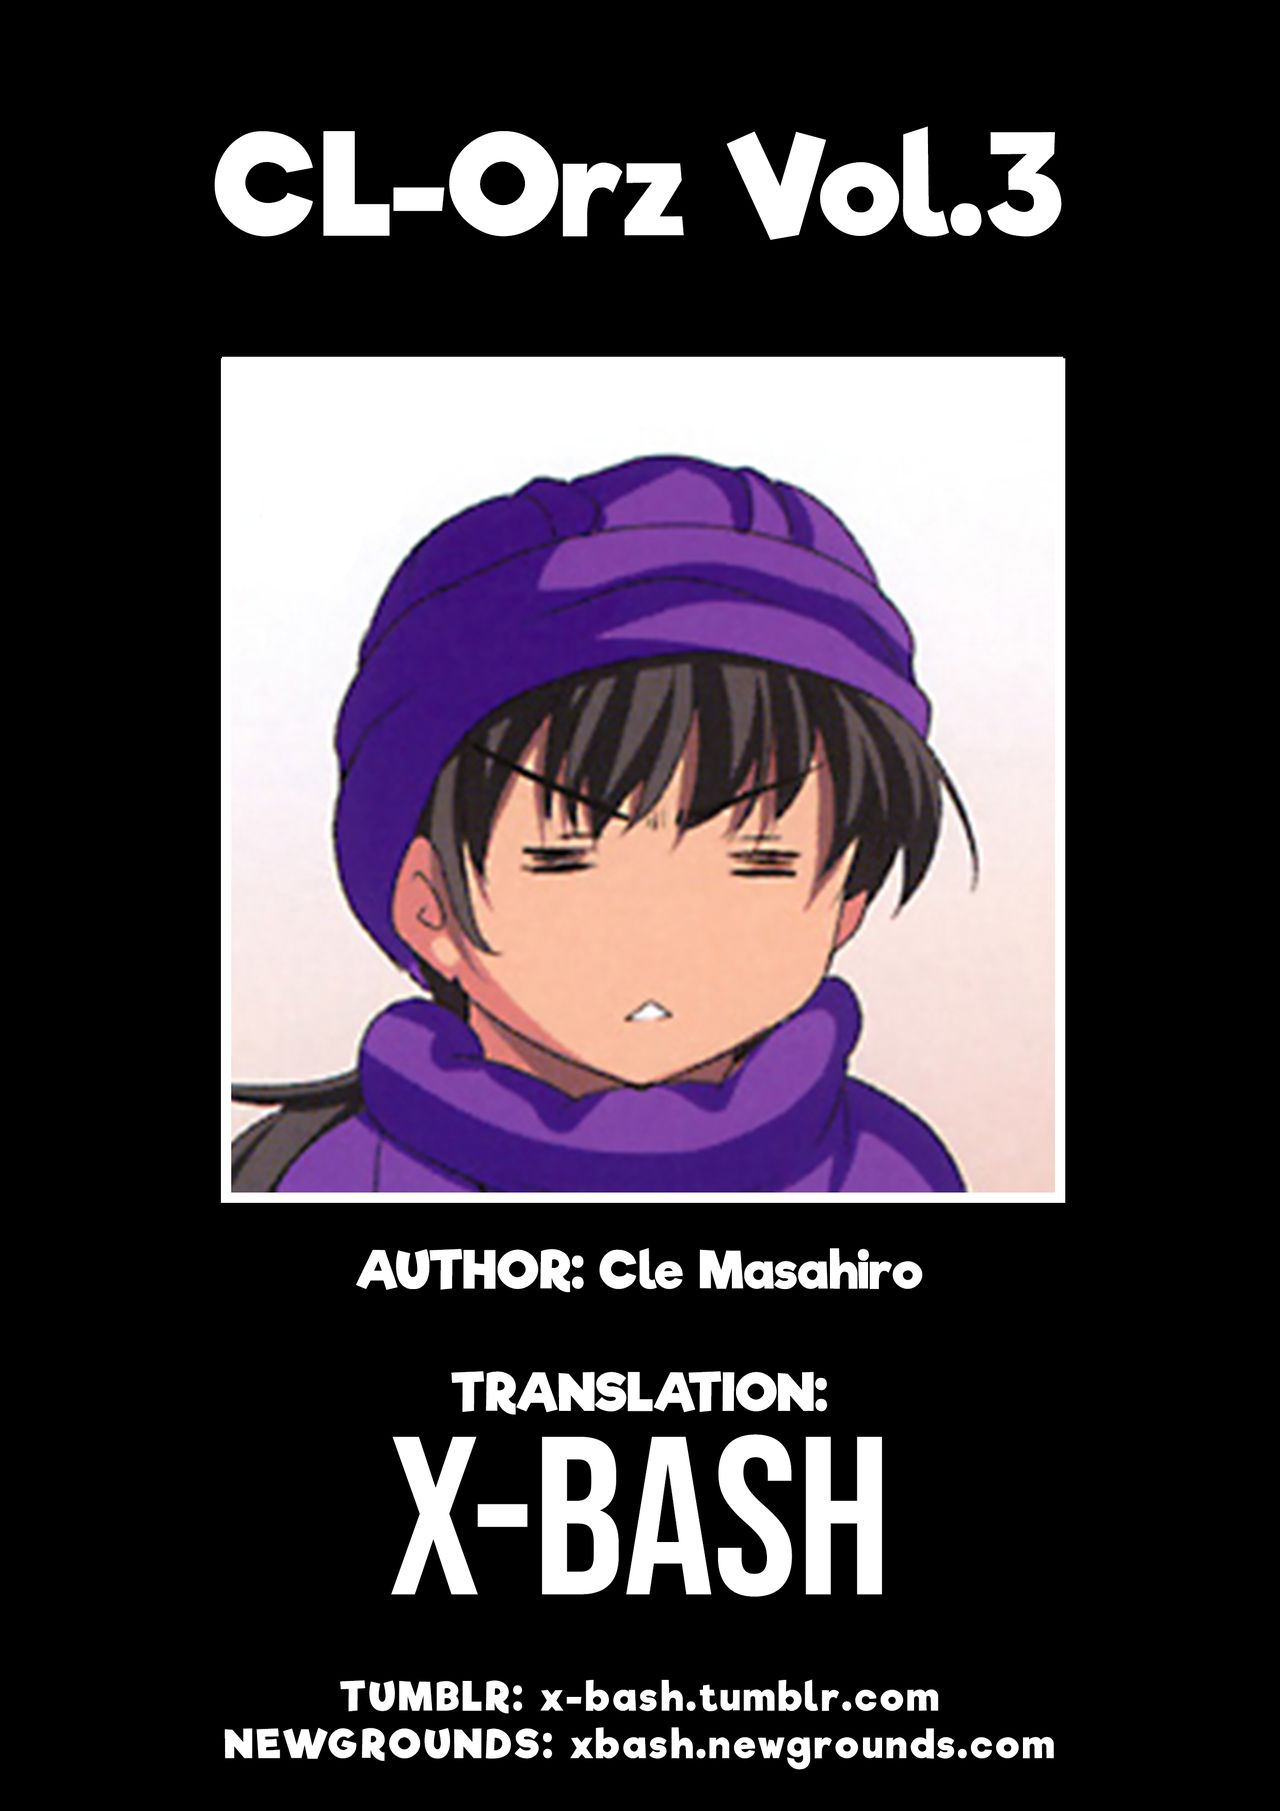 (C75) [etcycle (Cle Masahiro)] CL-orz'3 (Dragon Quest V) [Polish] [X-Bash] [Decensored] (C75) [etcycle (呉マサヒロ)] CL-orz'3 (ドラゴンクエストV) [ポーランド翻訳] [無修正]